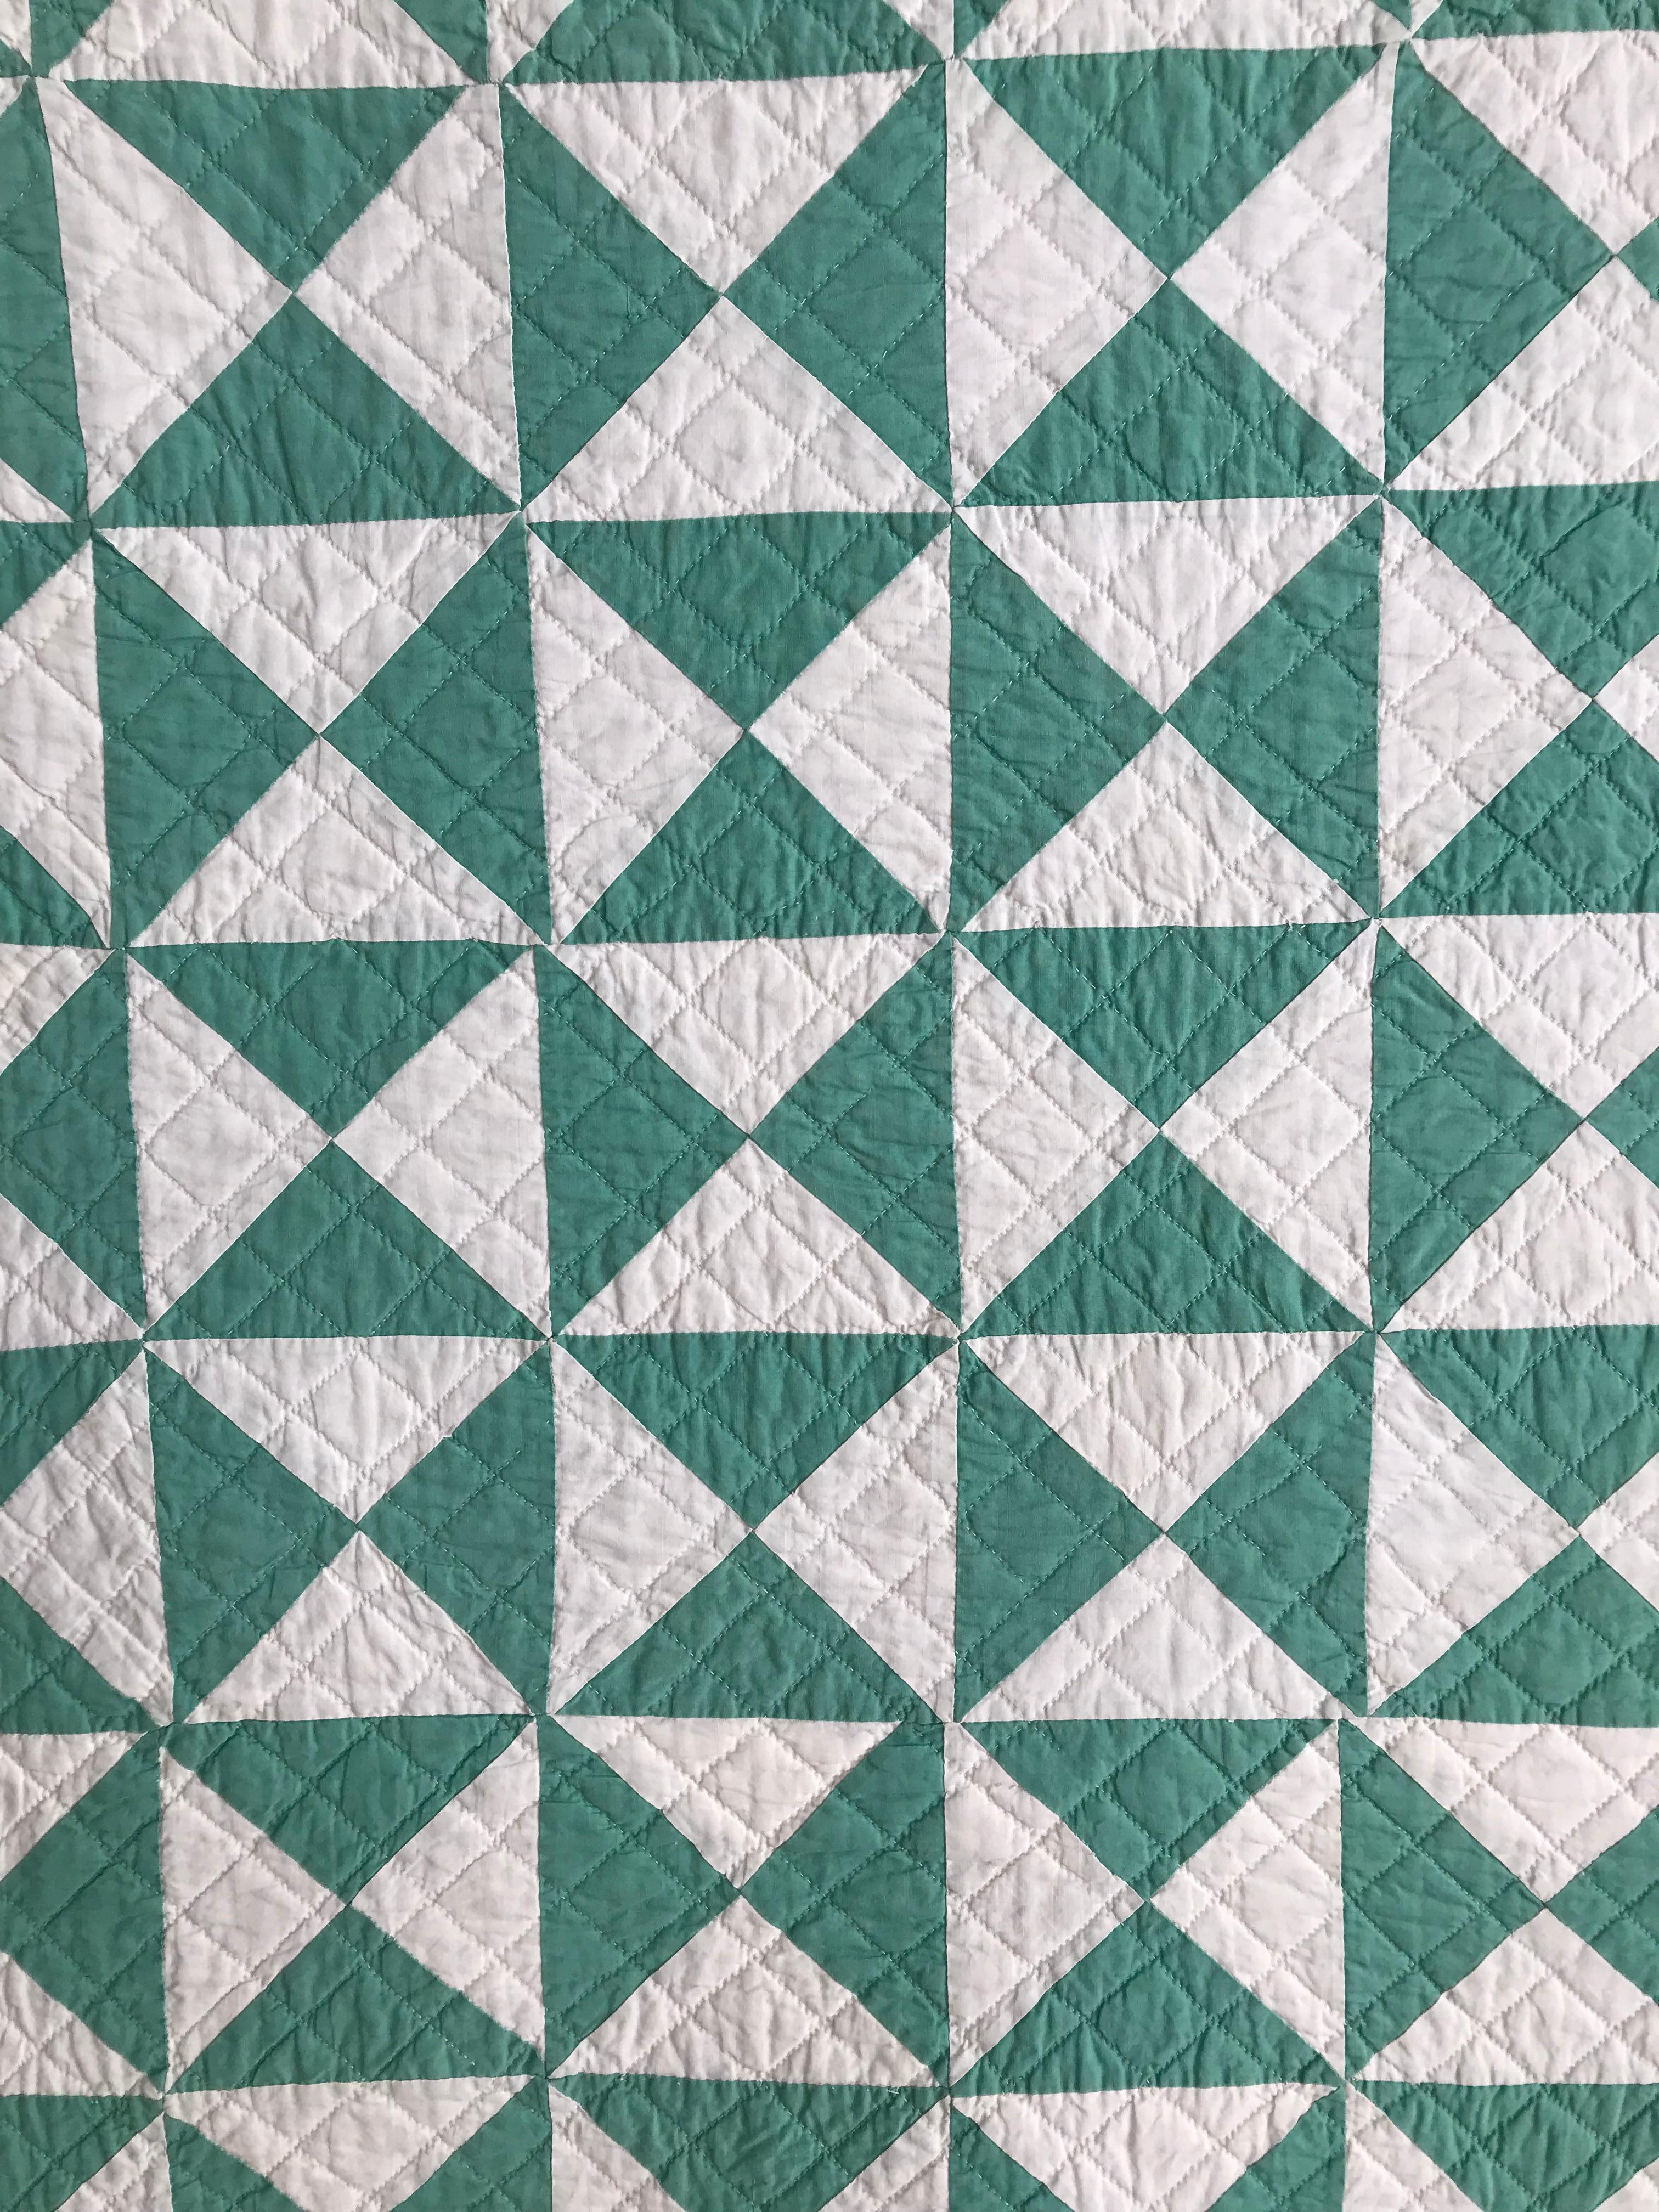 Quilted Green Vintage Patchwork Quilt